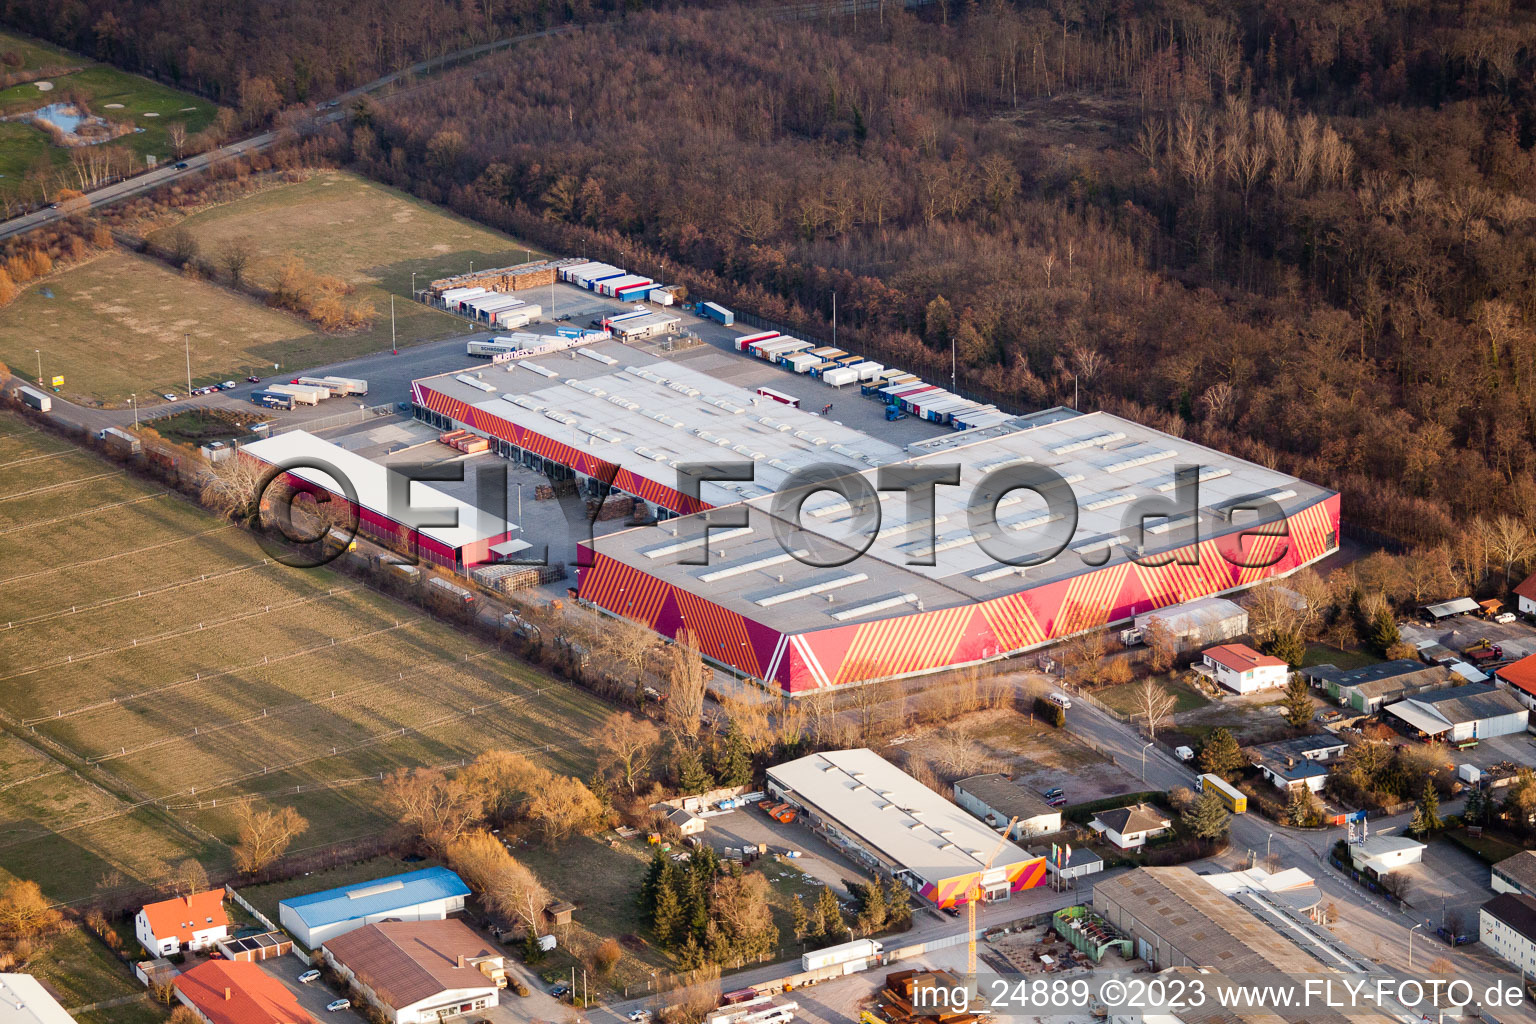 Hornbach hardware store in the Bruchwiesenstr industrial area in Bornheim in the state Rhineland-Palatinate, Germany seen from above